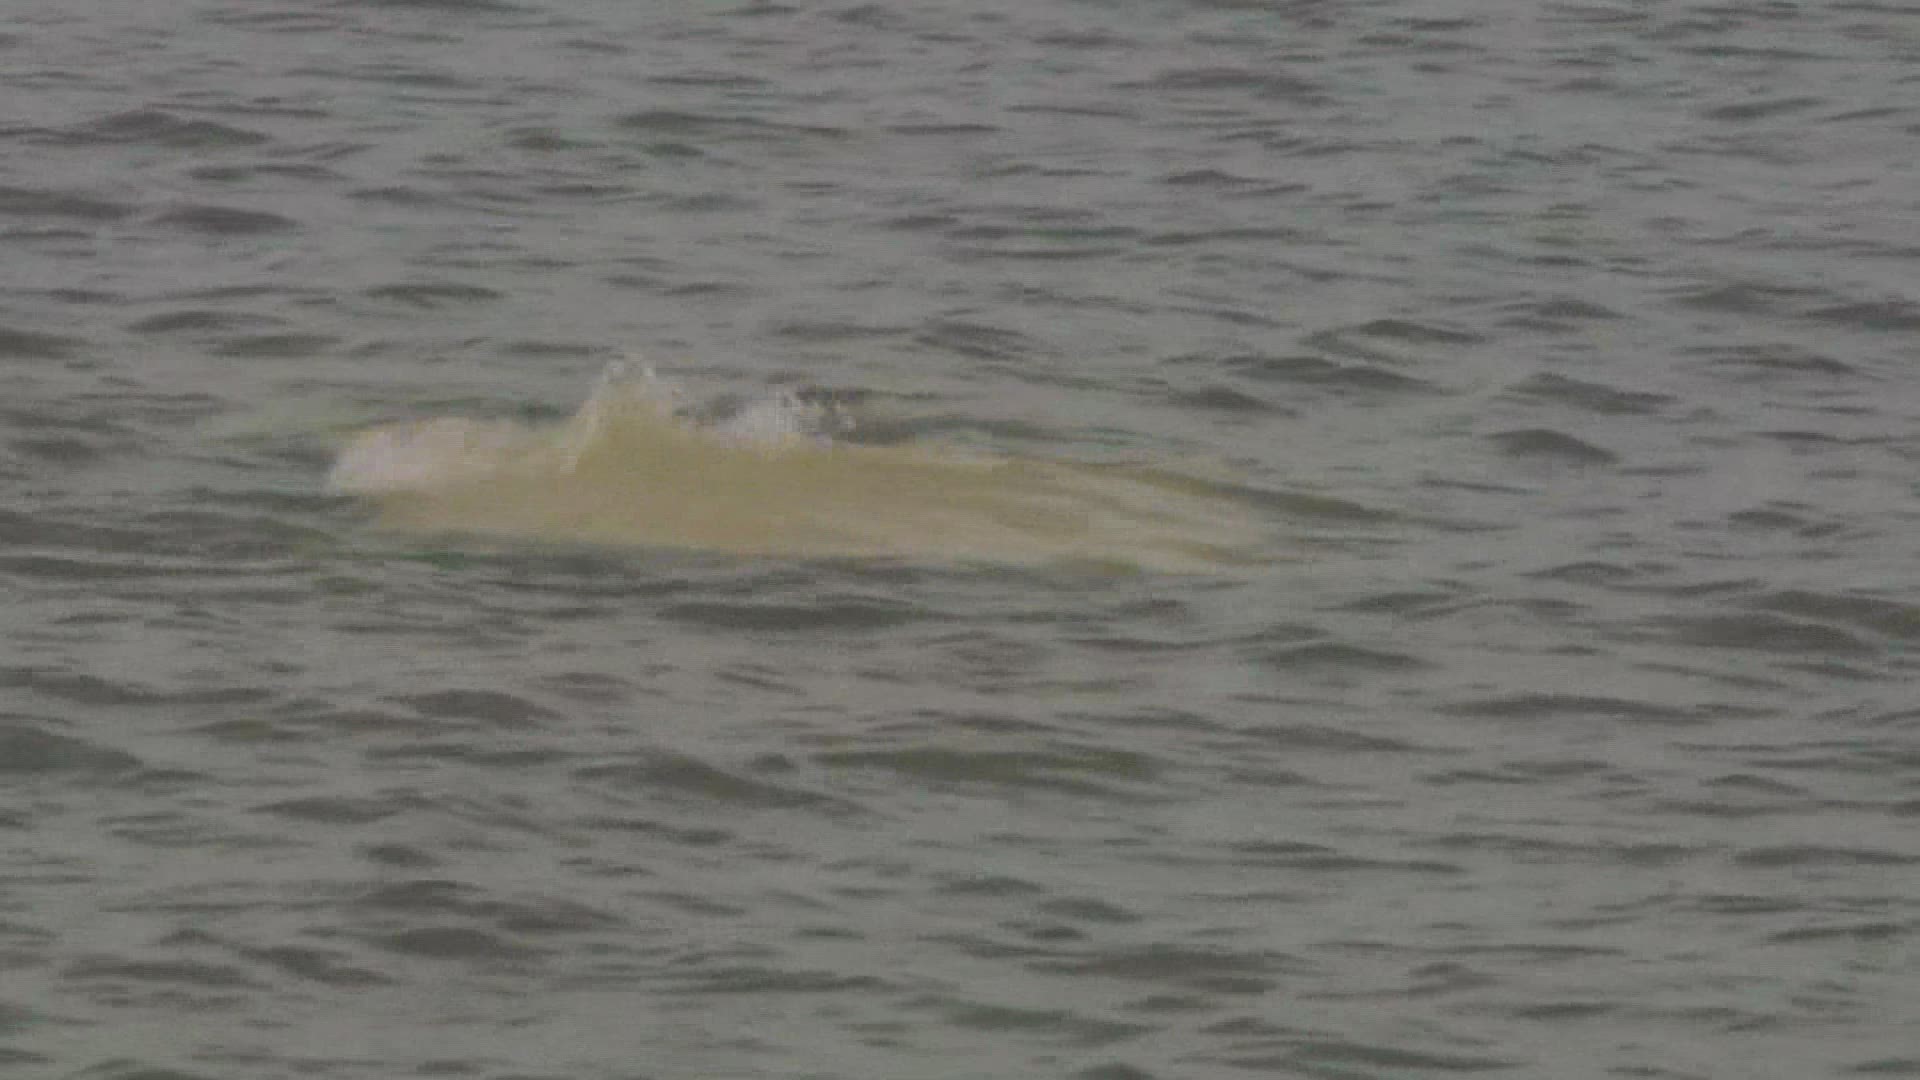 Driver rescued after car goes airborne, plunges into Lake Pontchartrain